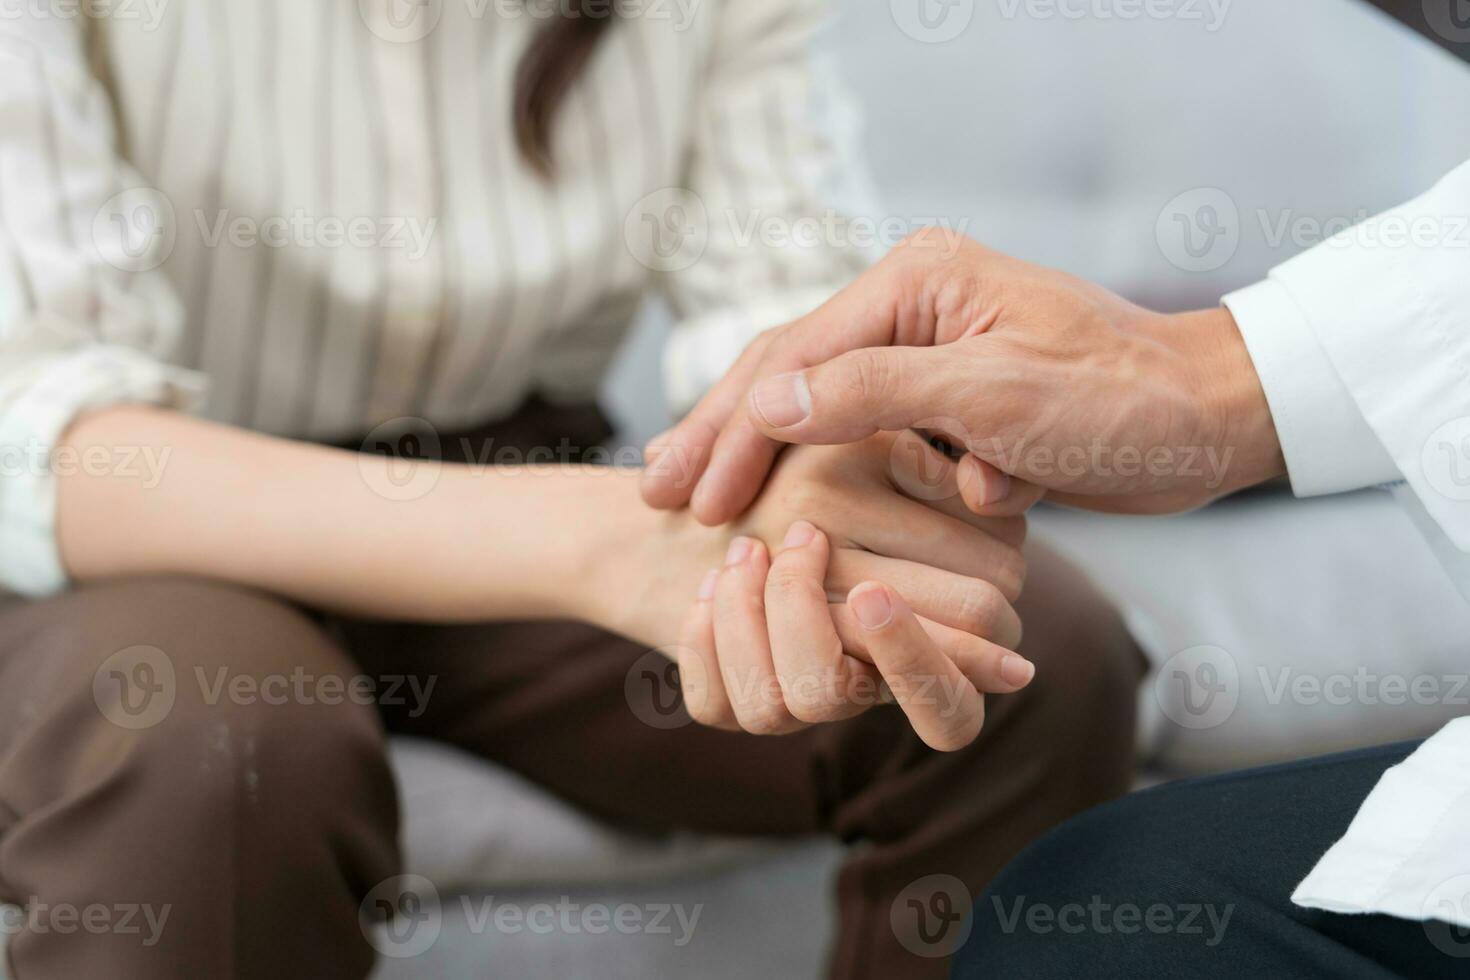 psychiatrist hold hand support each while discussing family issues. doctor encourages and empathy woman suffers depression. psychological, save divorce, Hand in hand together, trust, care photo